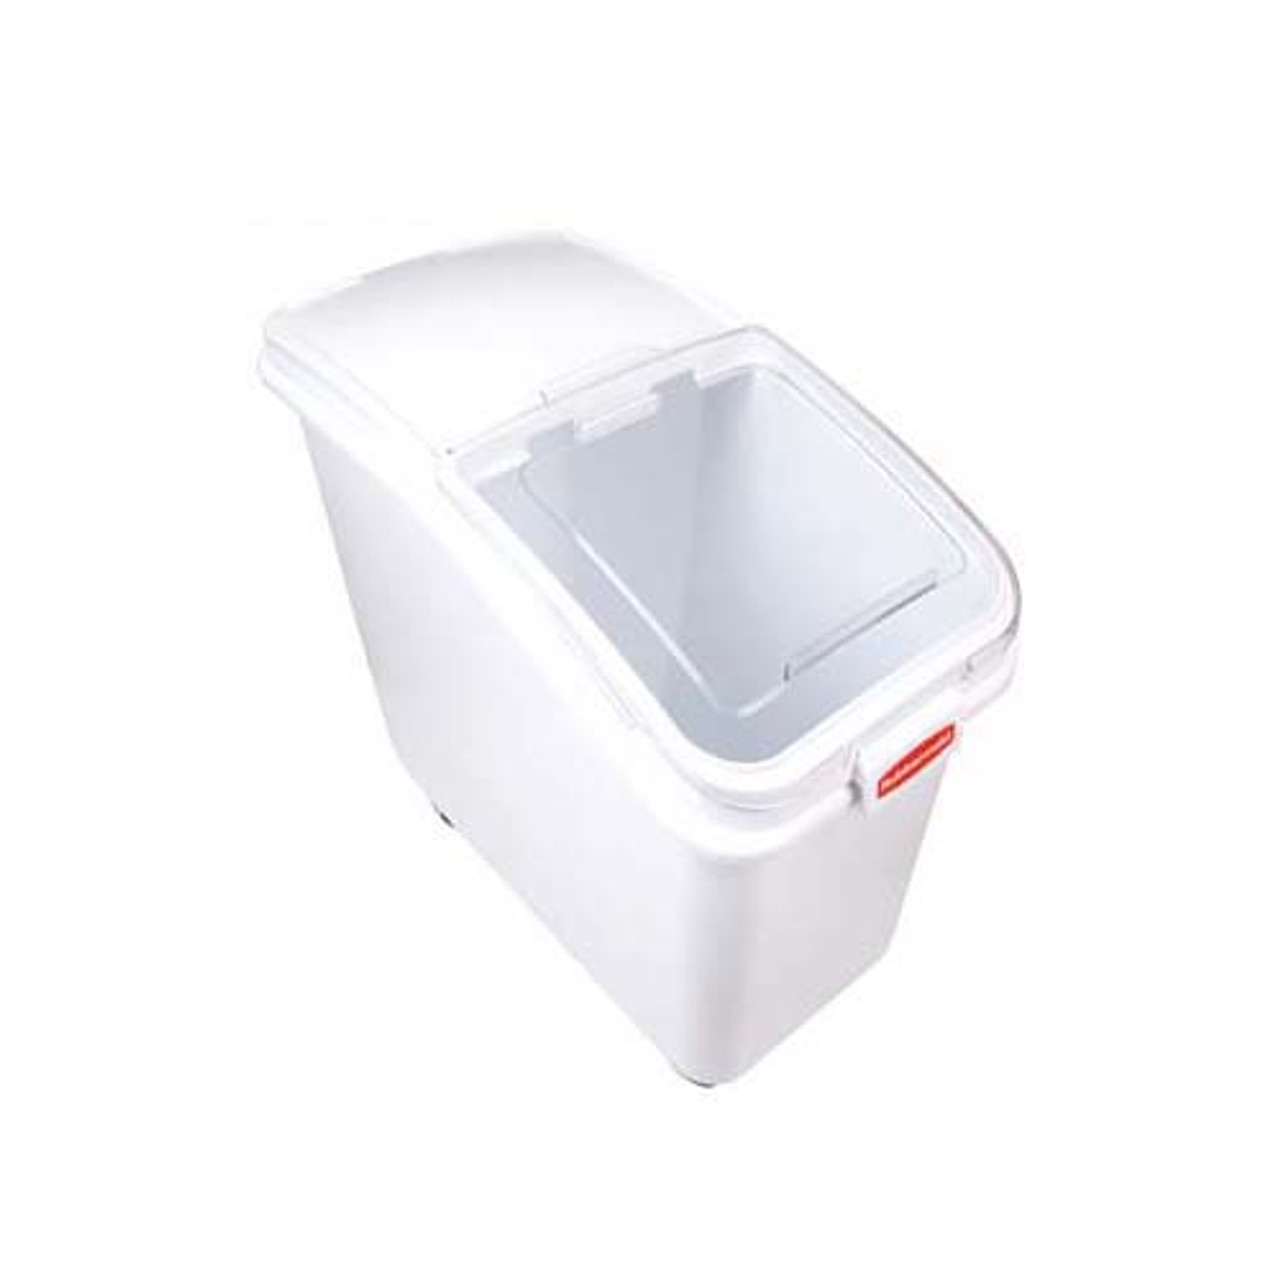 Ingredient Bin 26 Rubber White - Replacement Part For Rubbermaid 3602-88